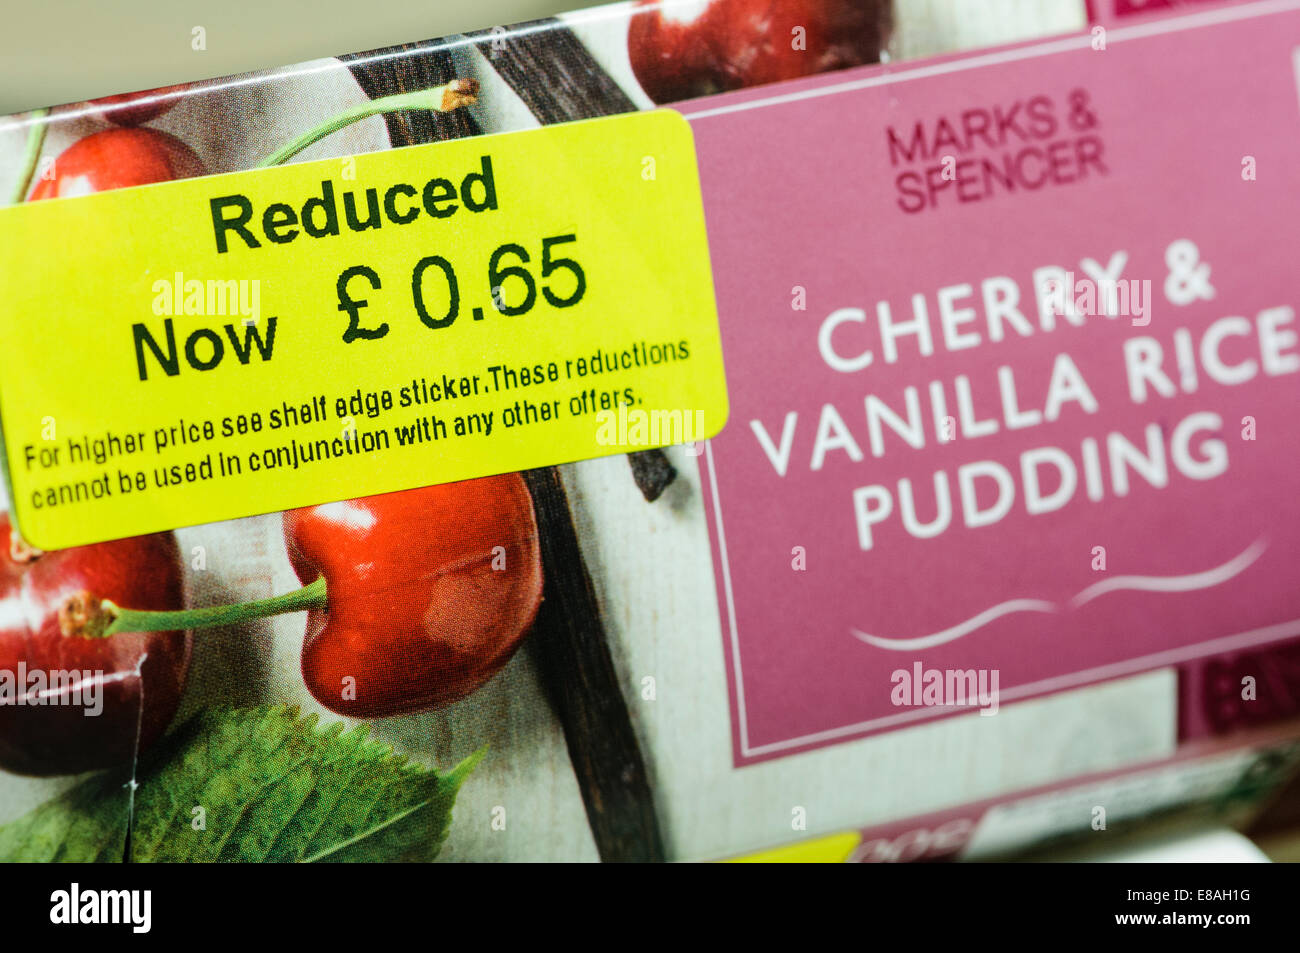 Reduced price label on a Marks and Spencer cherry and vanilla rice pudding Stock Photo